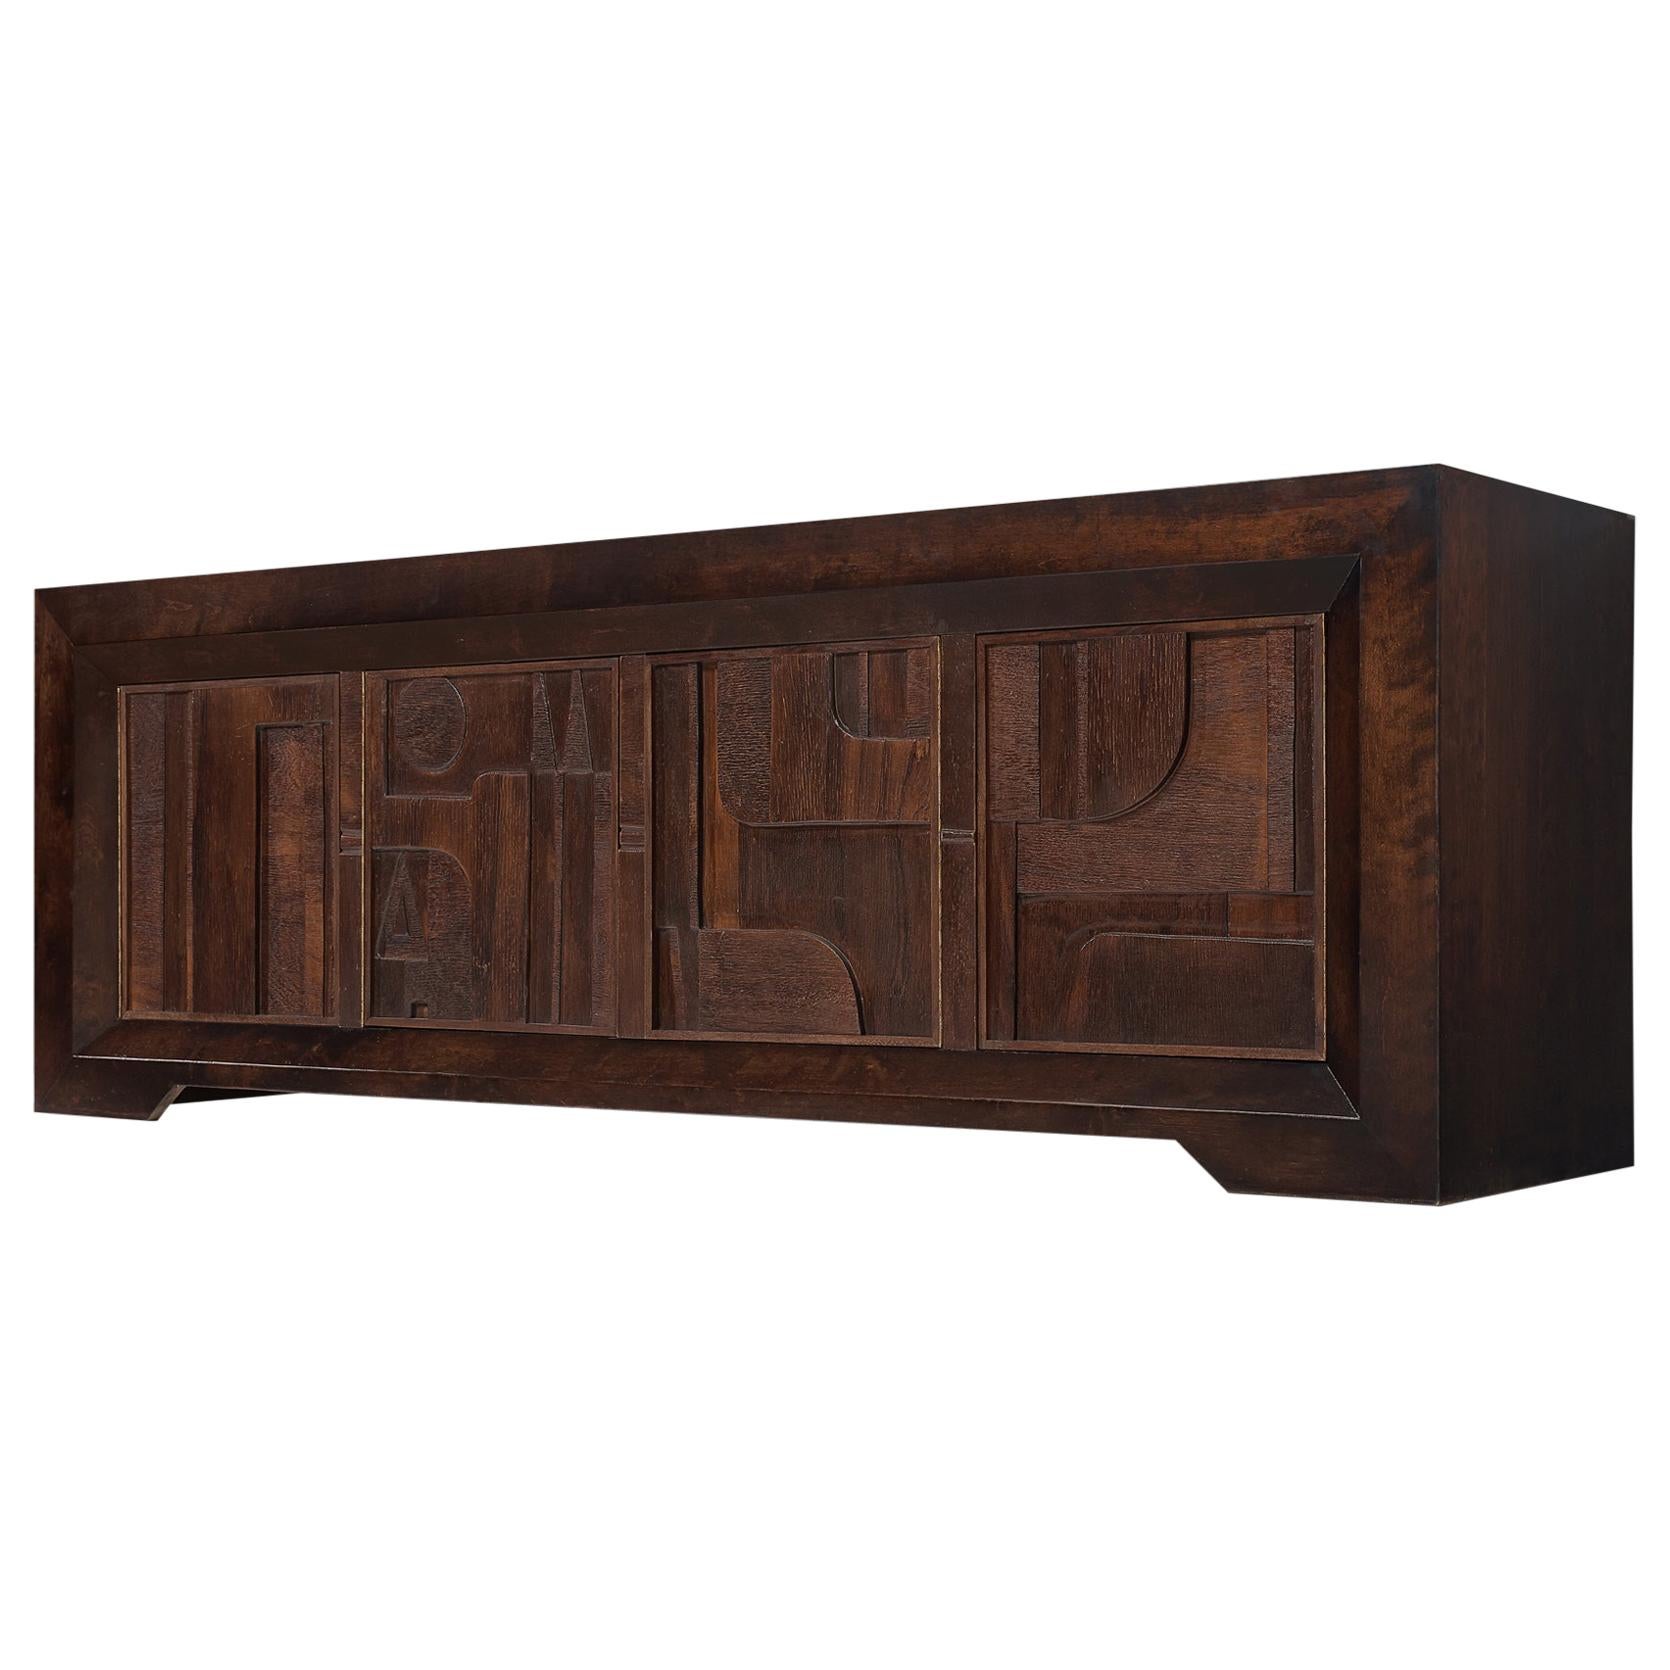 Nerone and Patuzzi for Gruppo NP2 Constructivism Wooden Sideboard